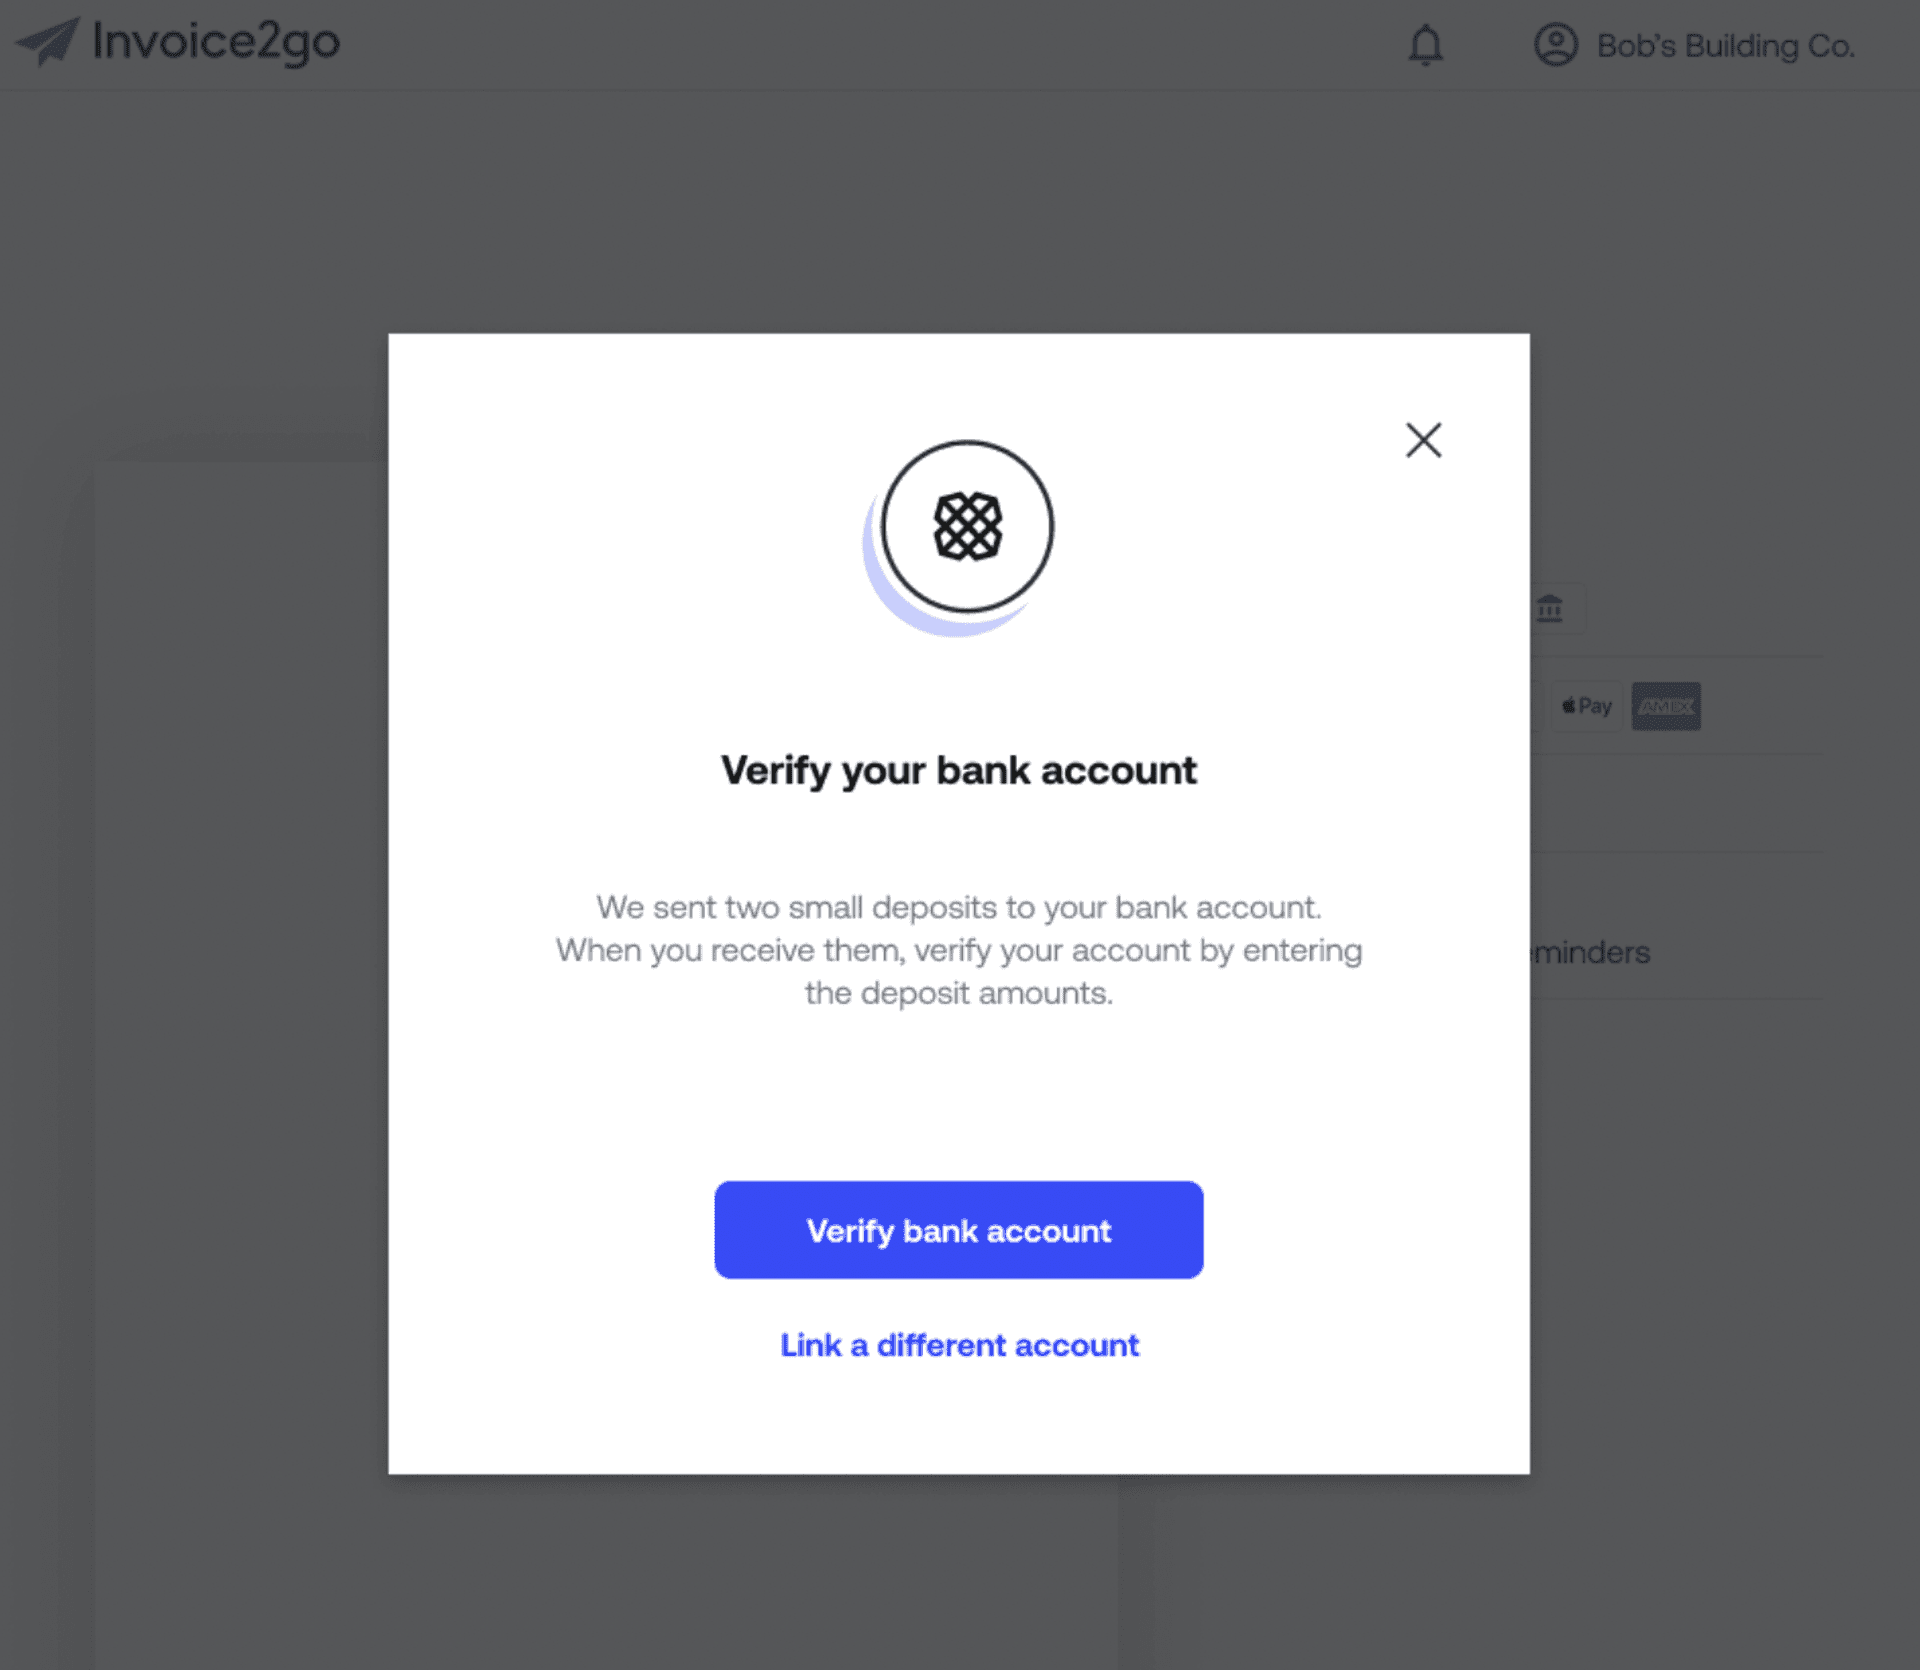 image of pop-up verifying bank account information